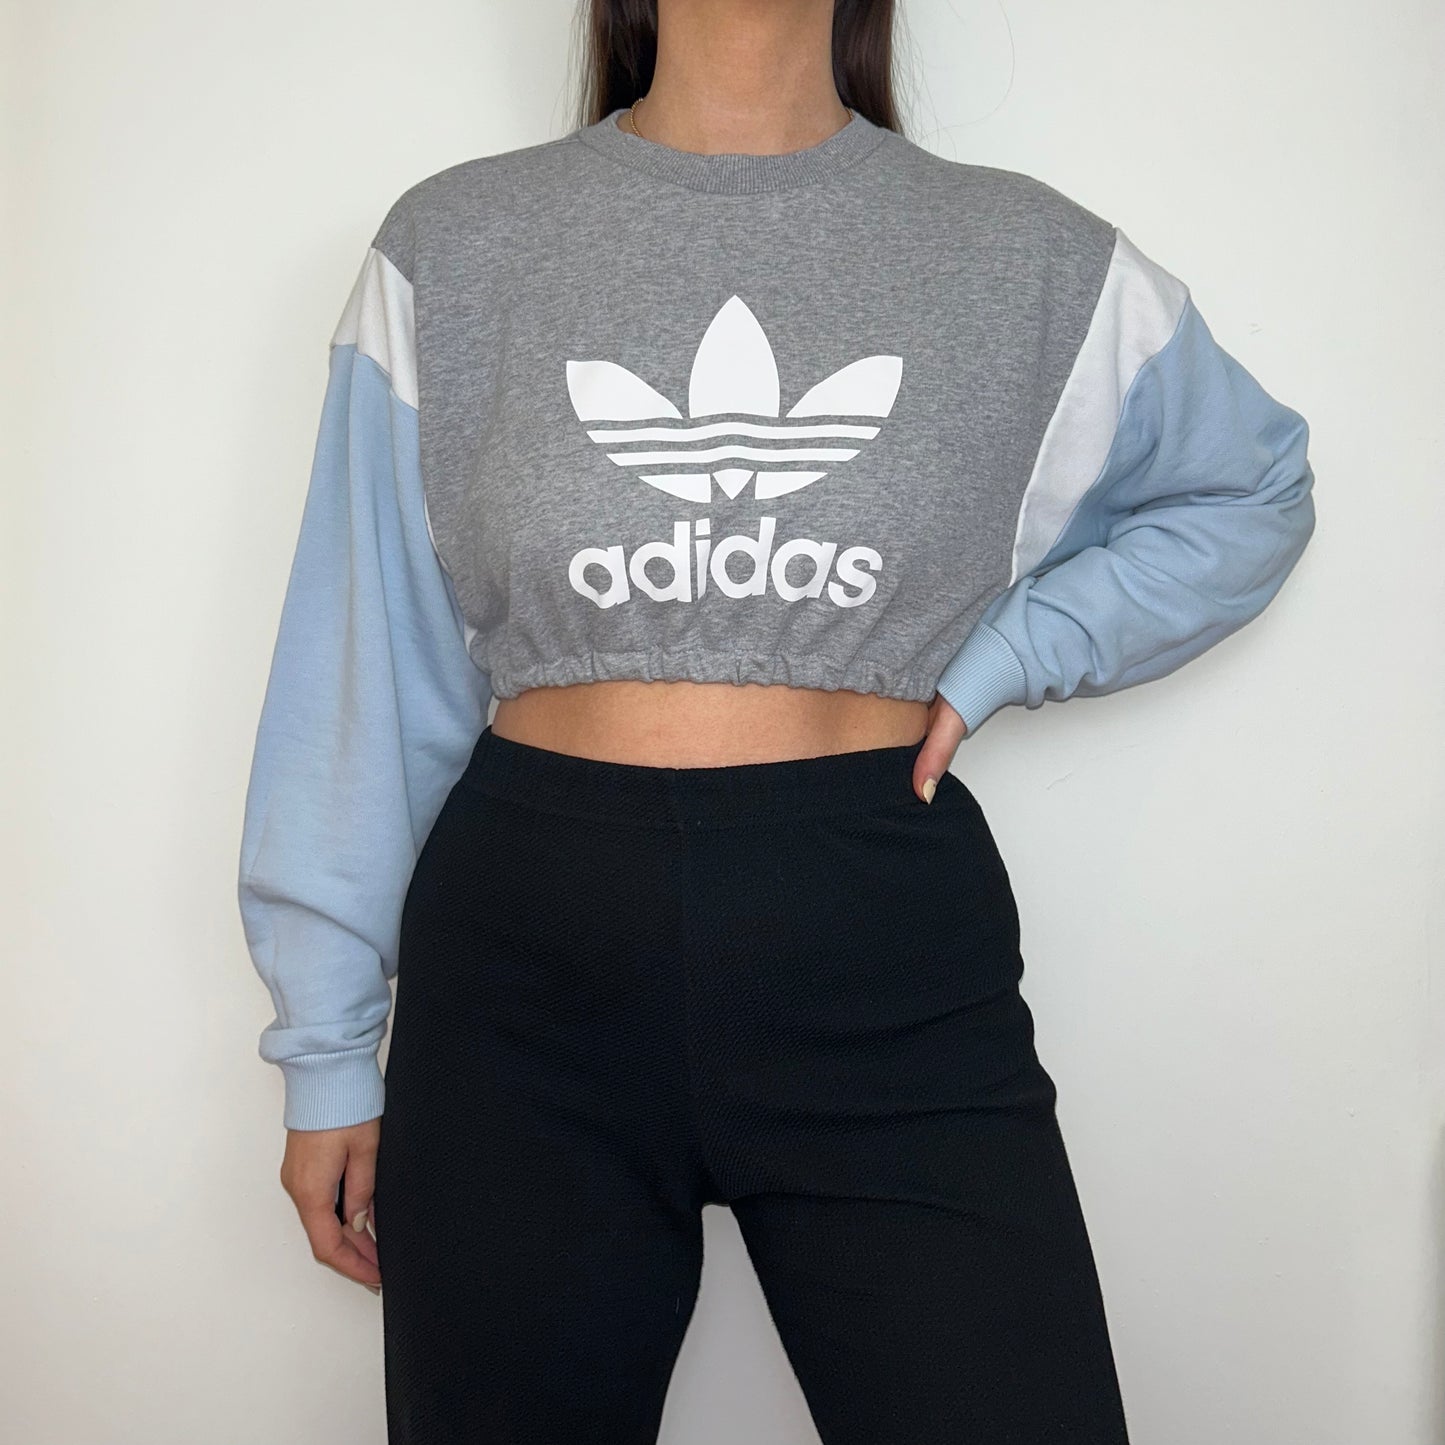 grey and blue cropped sweatshirt with white adidas logo shown on a model wearing black trousers